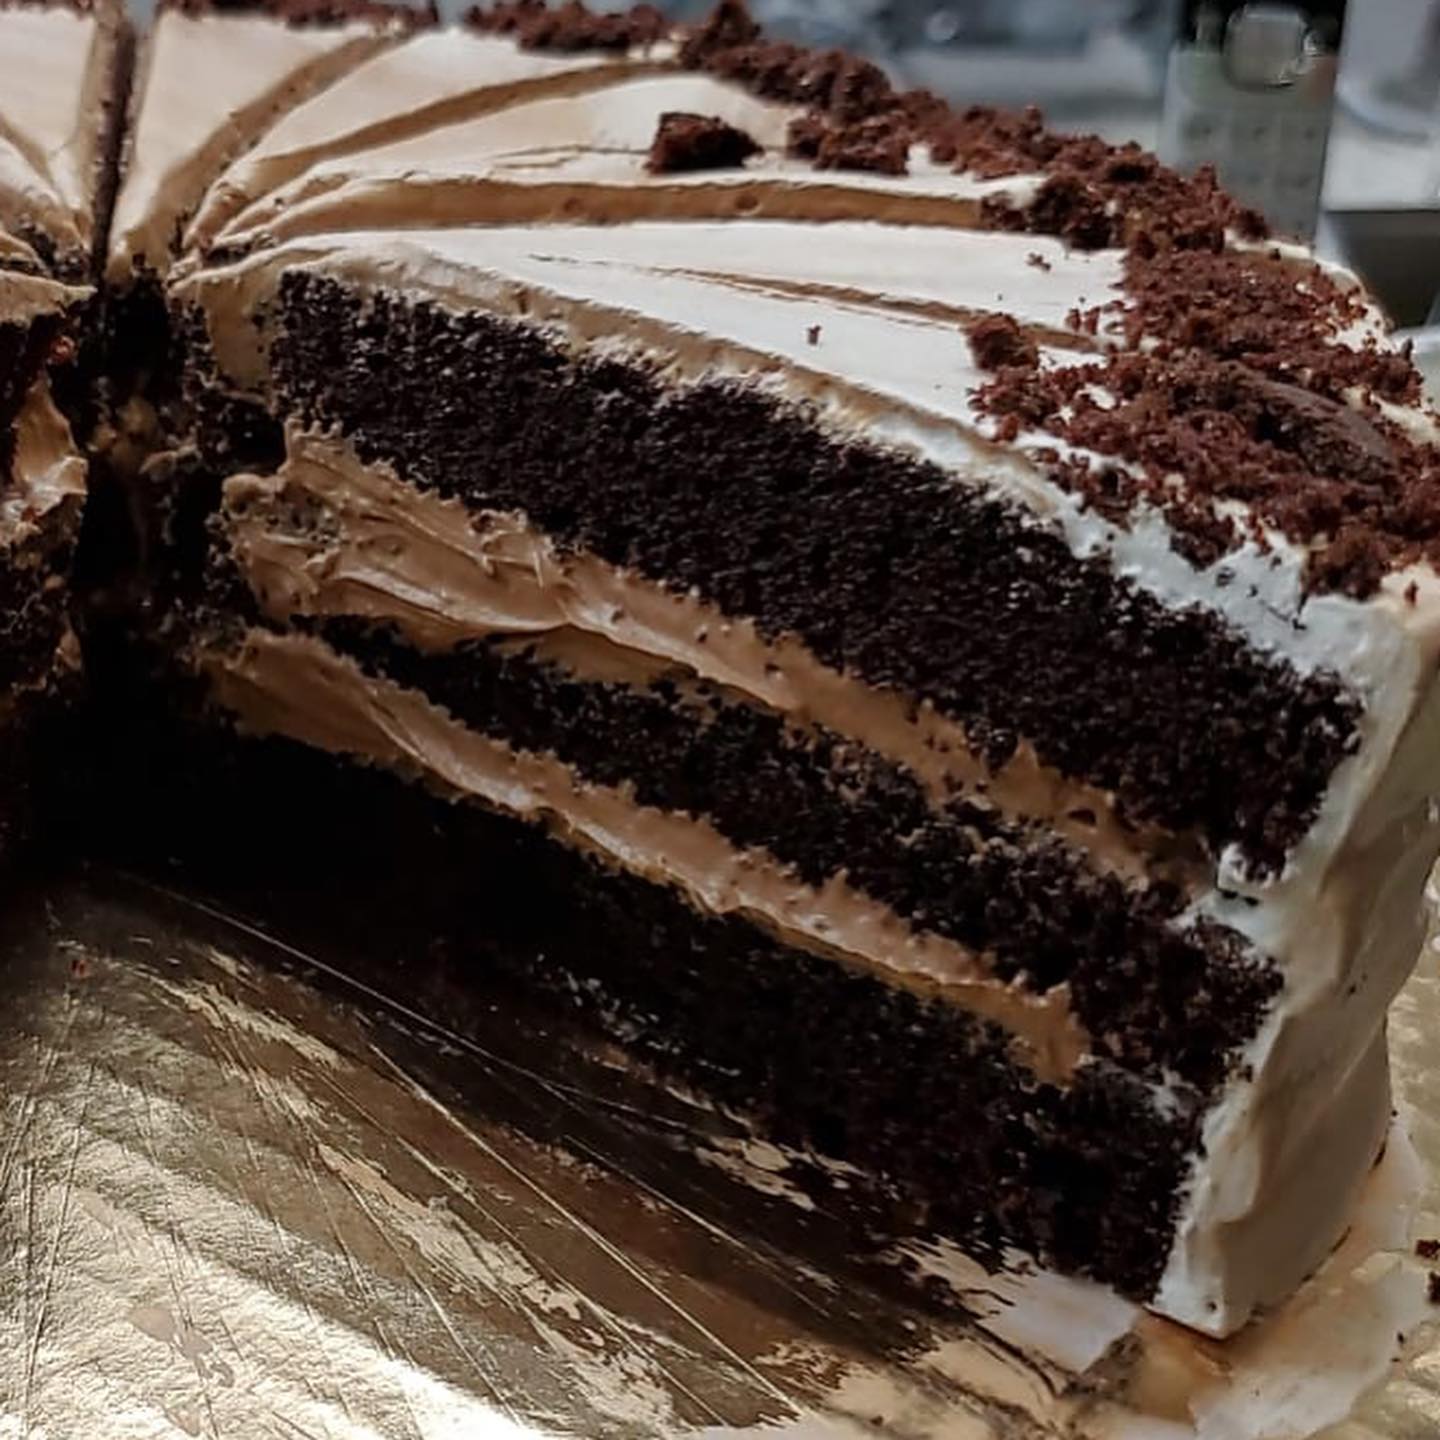 Close-up of a sliced chocolate cake with multiple layers of dark sponge and thick cream frosting, topped with crumbled chocolate.